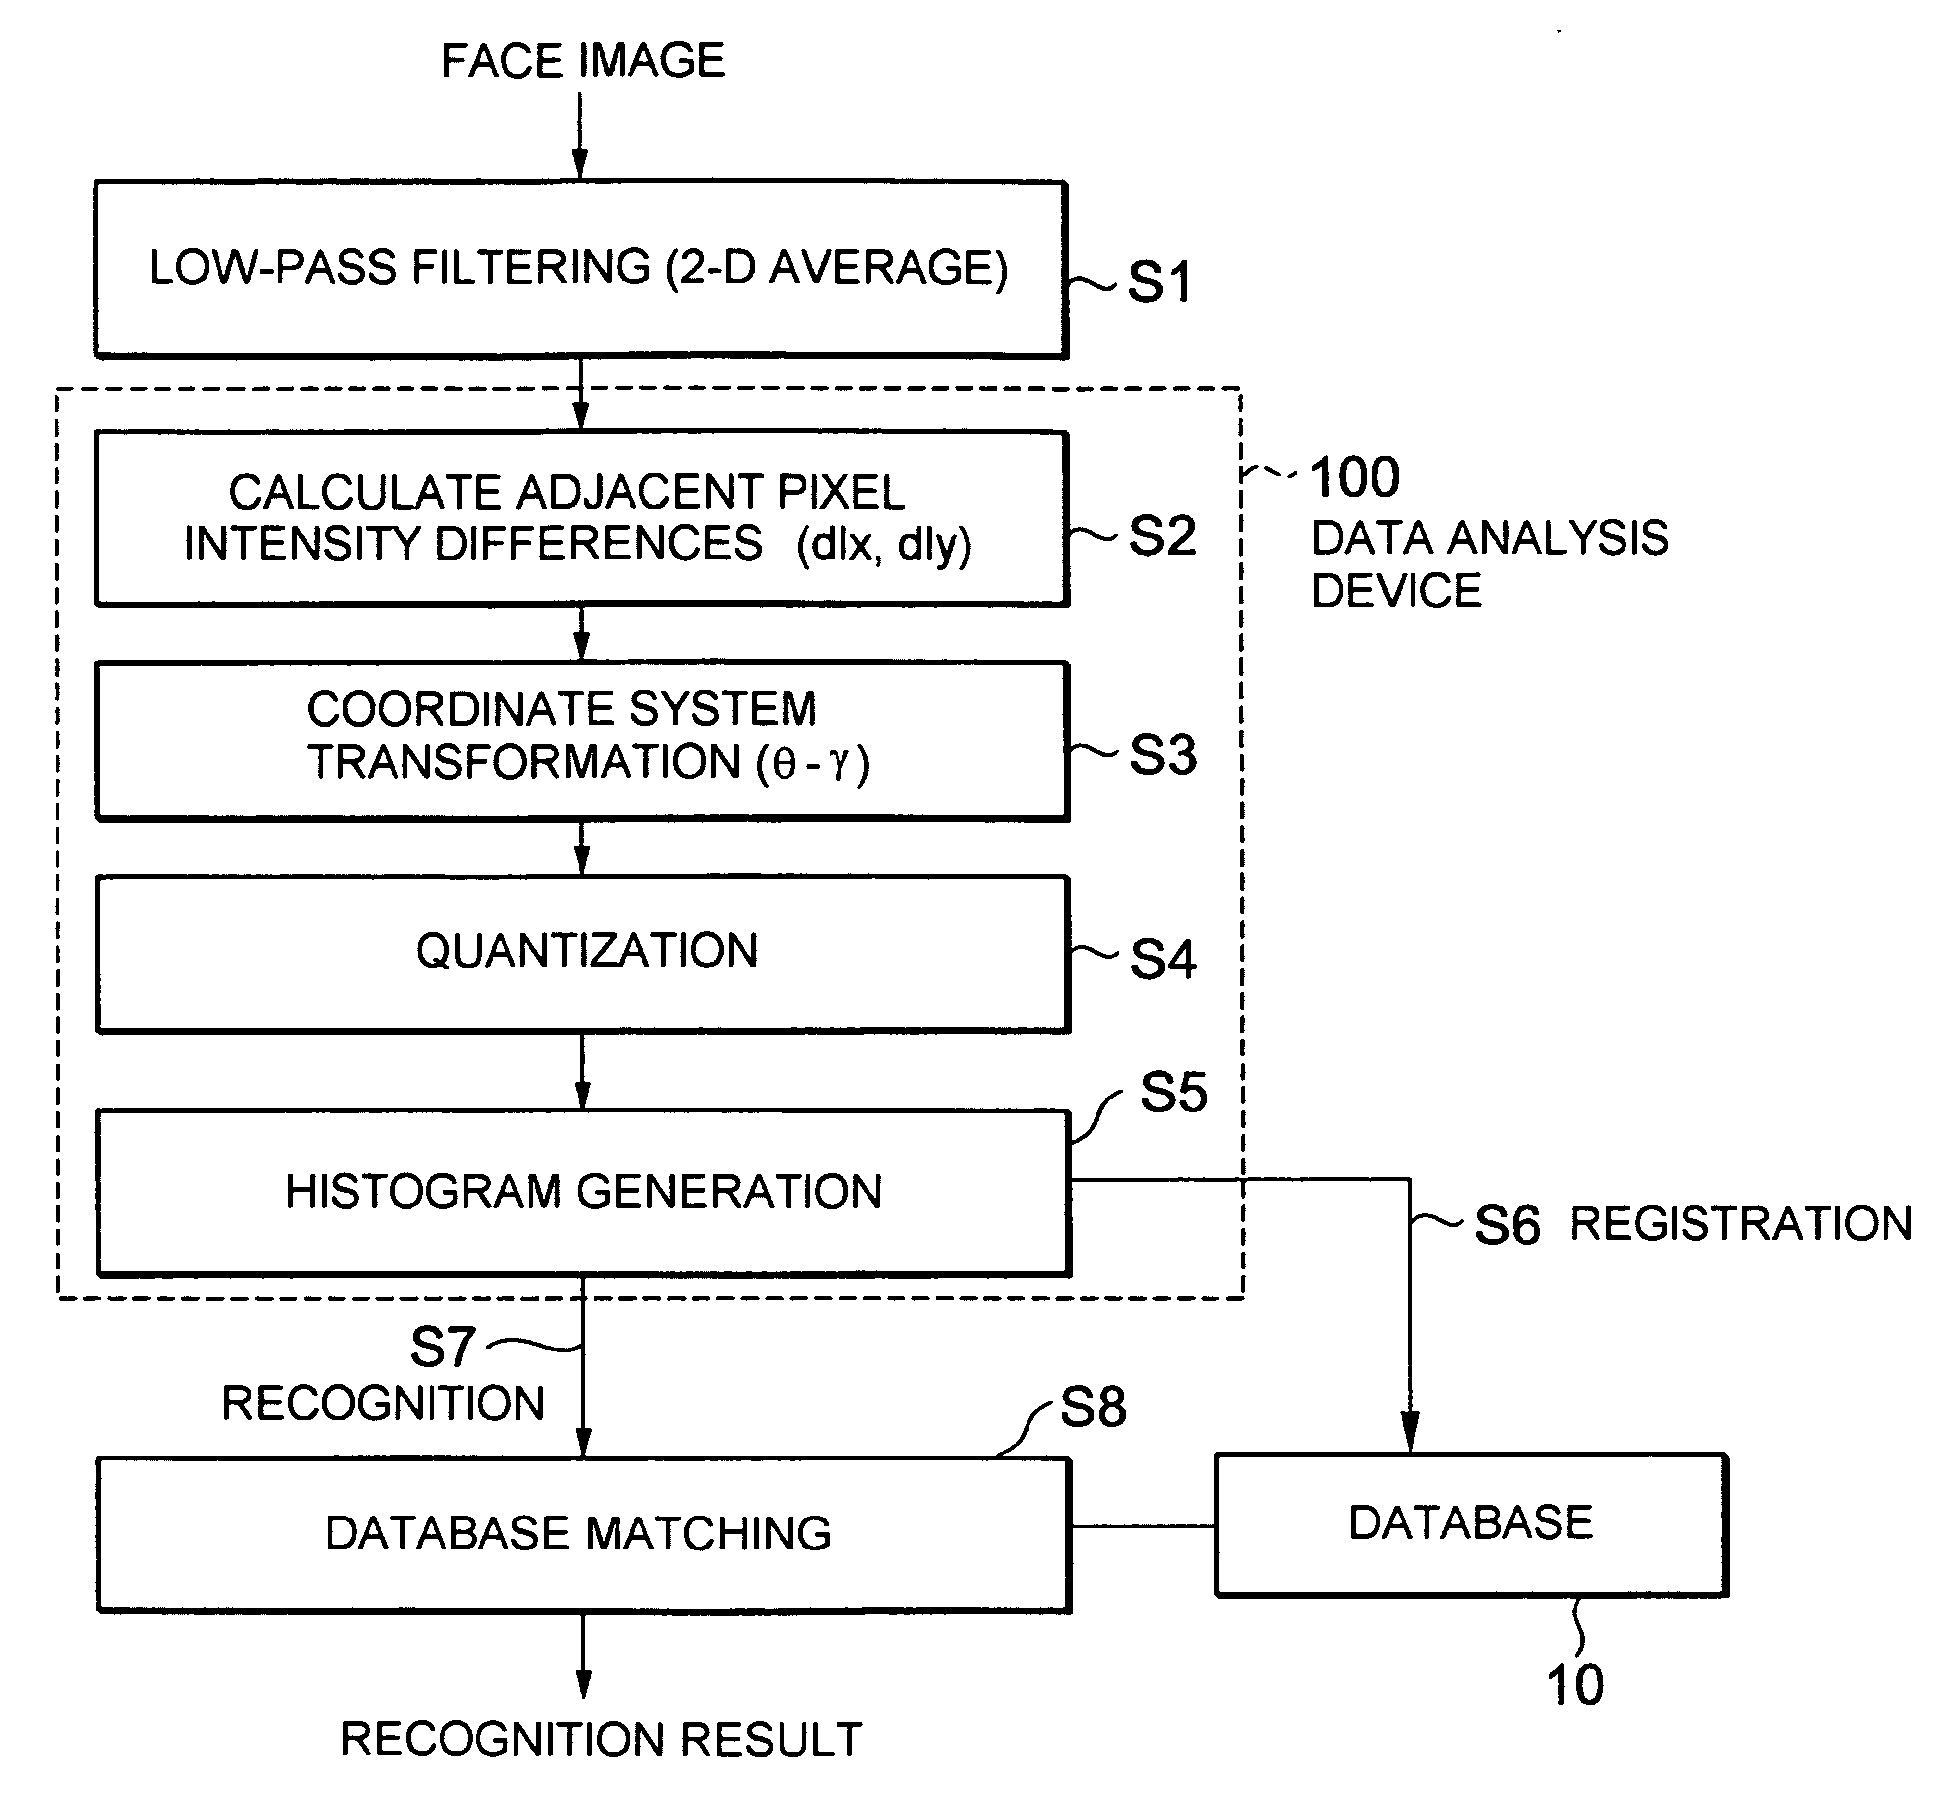 Data analysis device and data recognition device